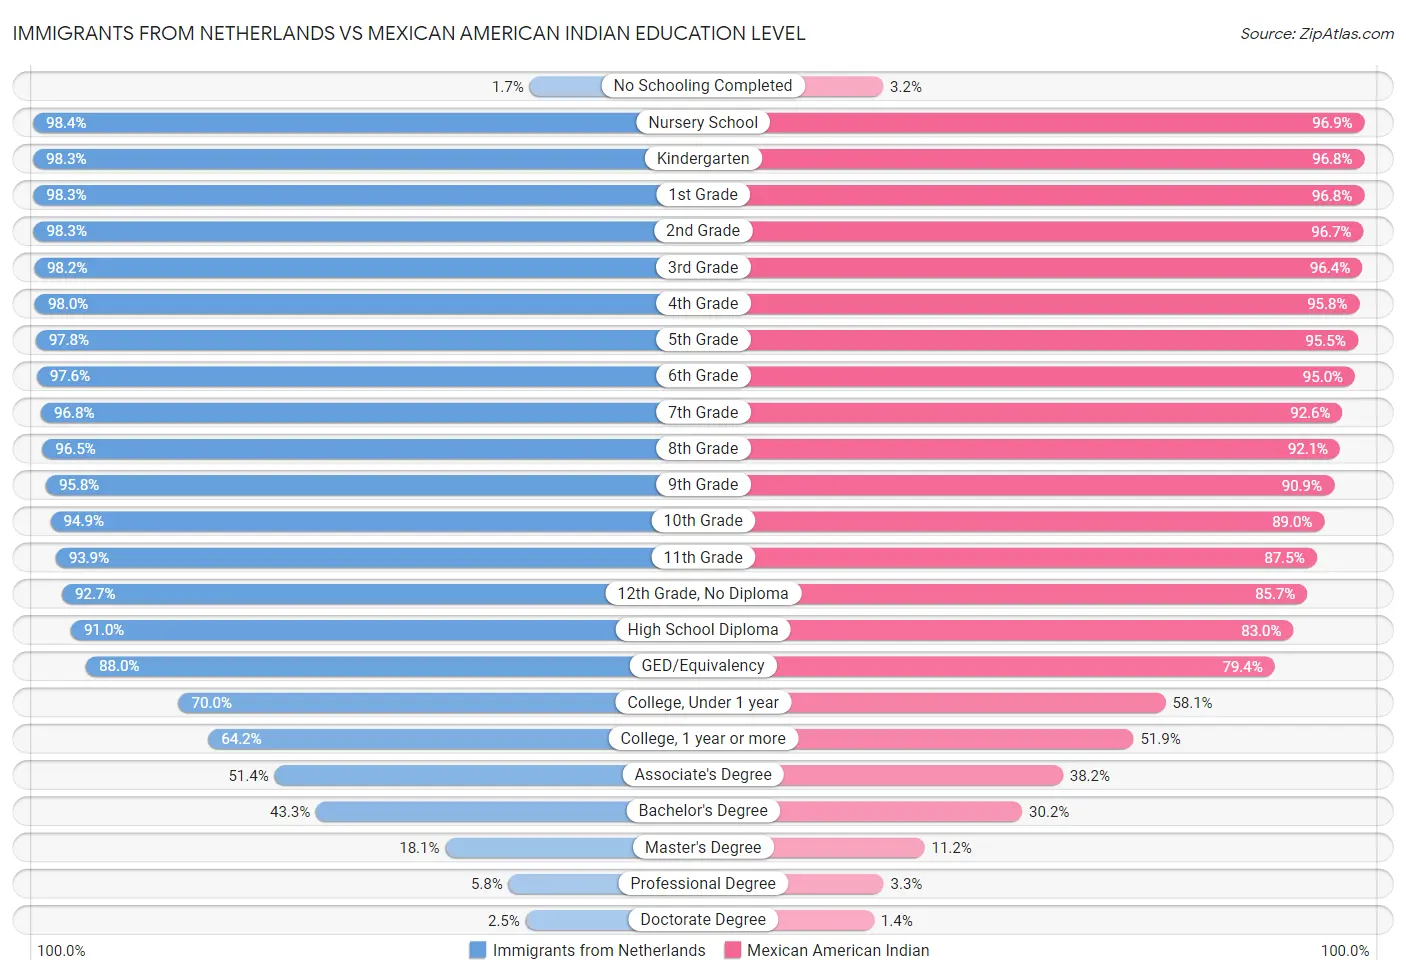 Immigrants from Netherlands vs Mexican American Indian Education Level